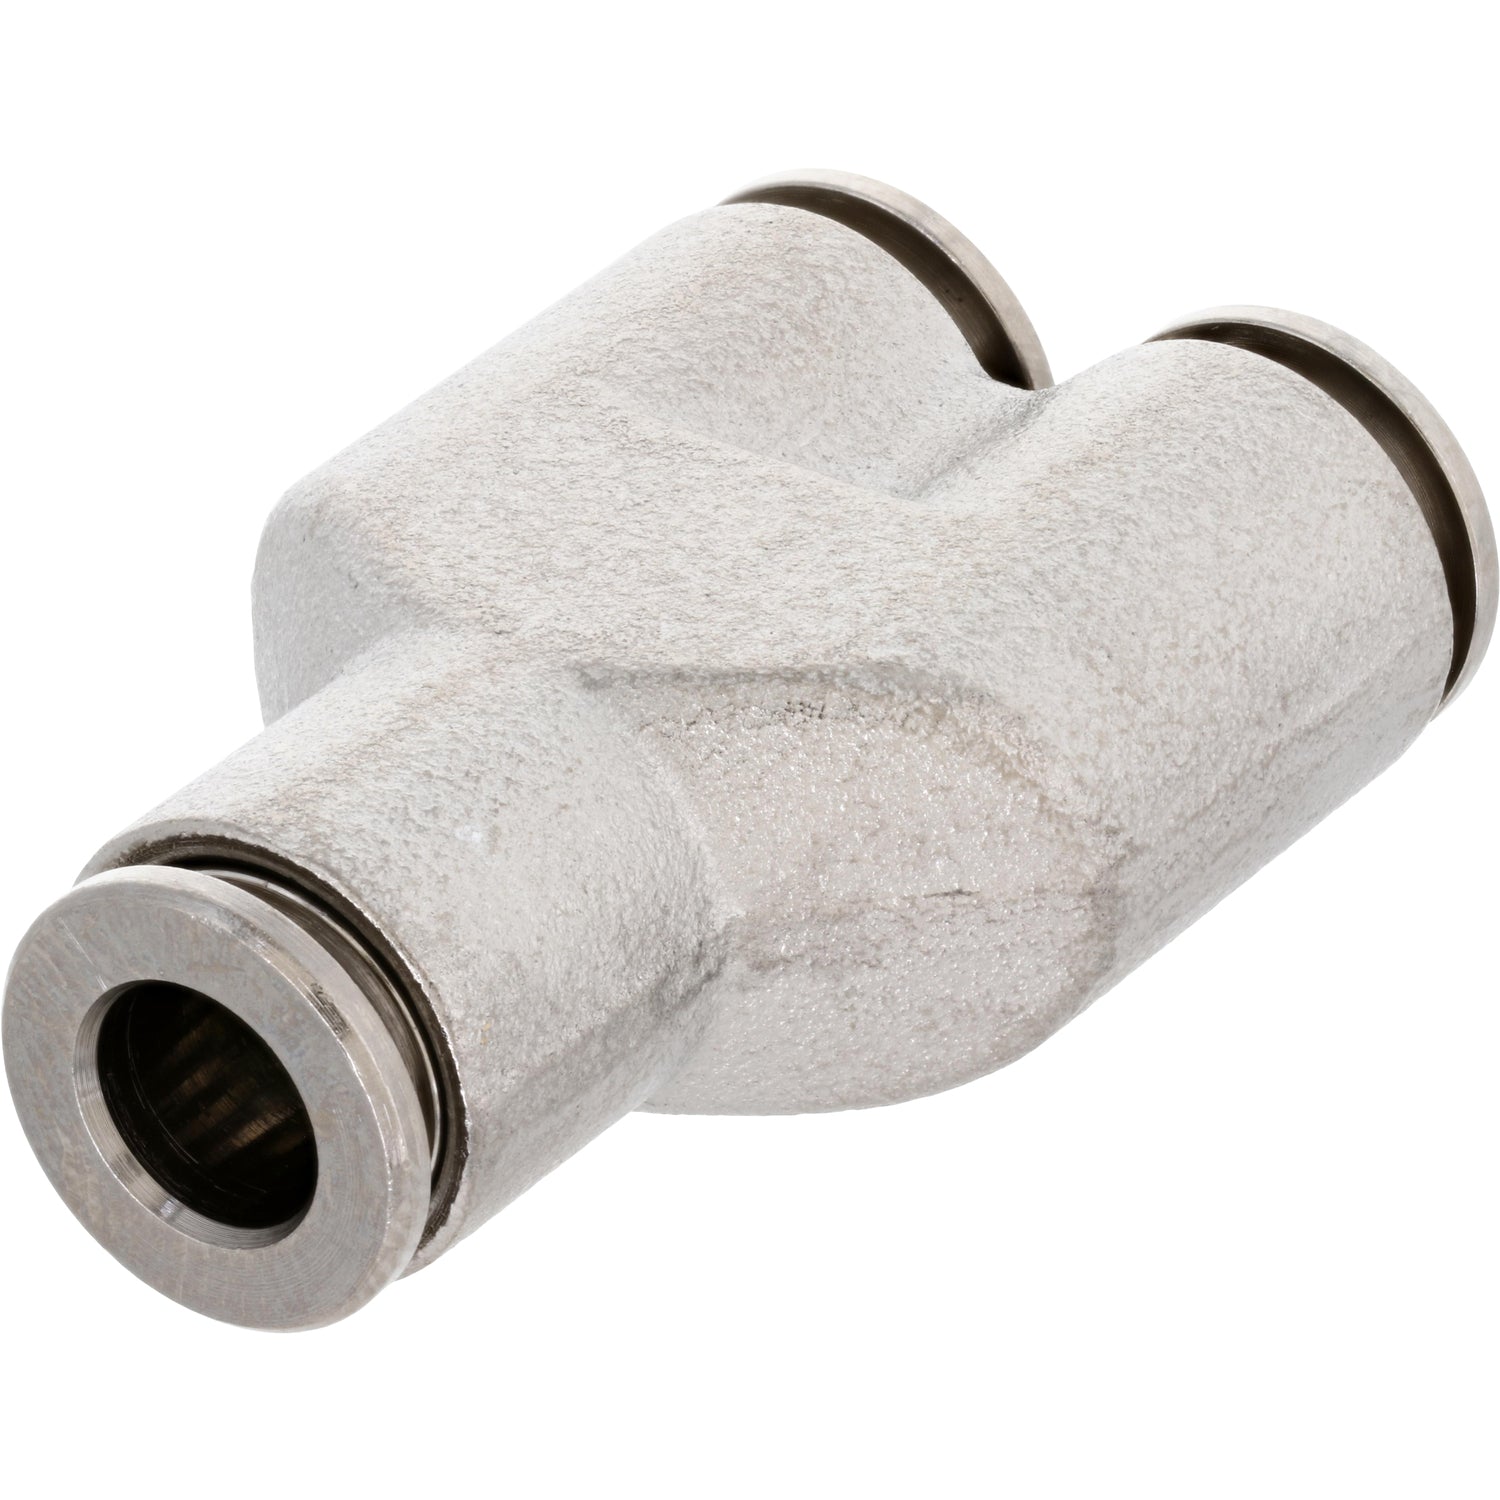 Nickel-plated brass push-in Y-connector on white background. 